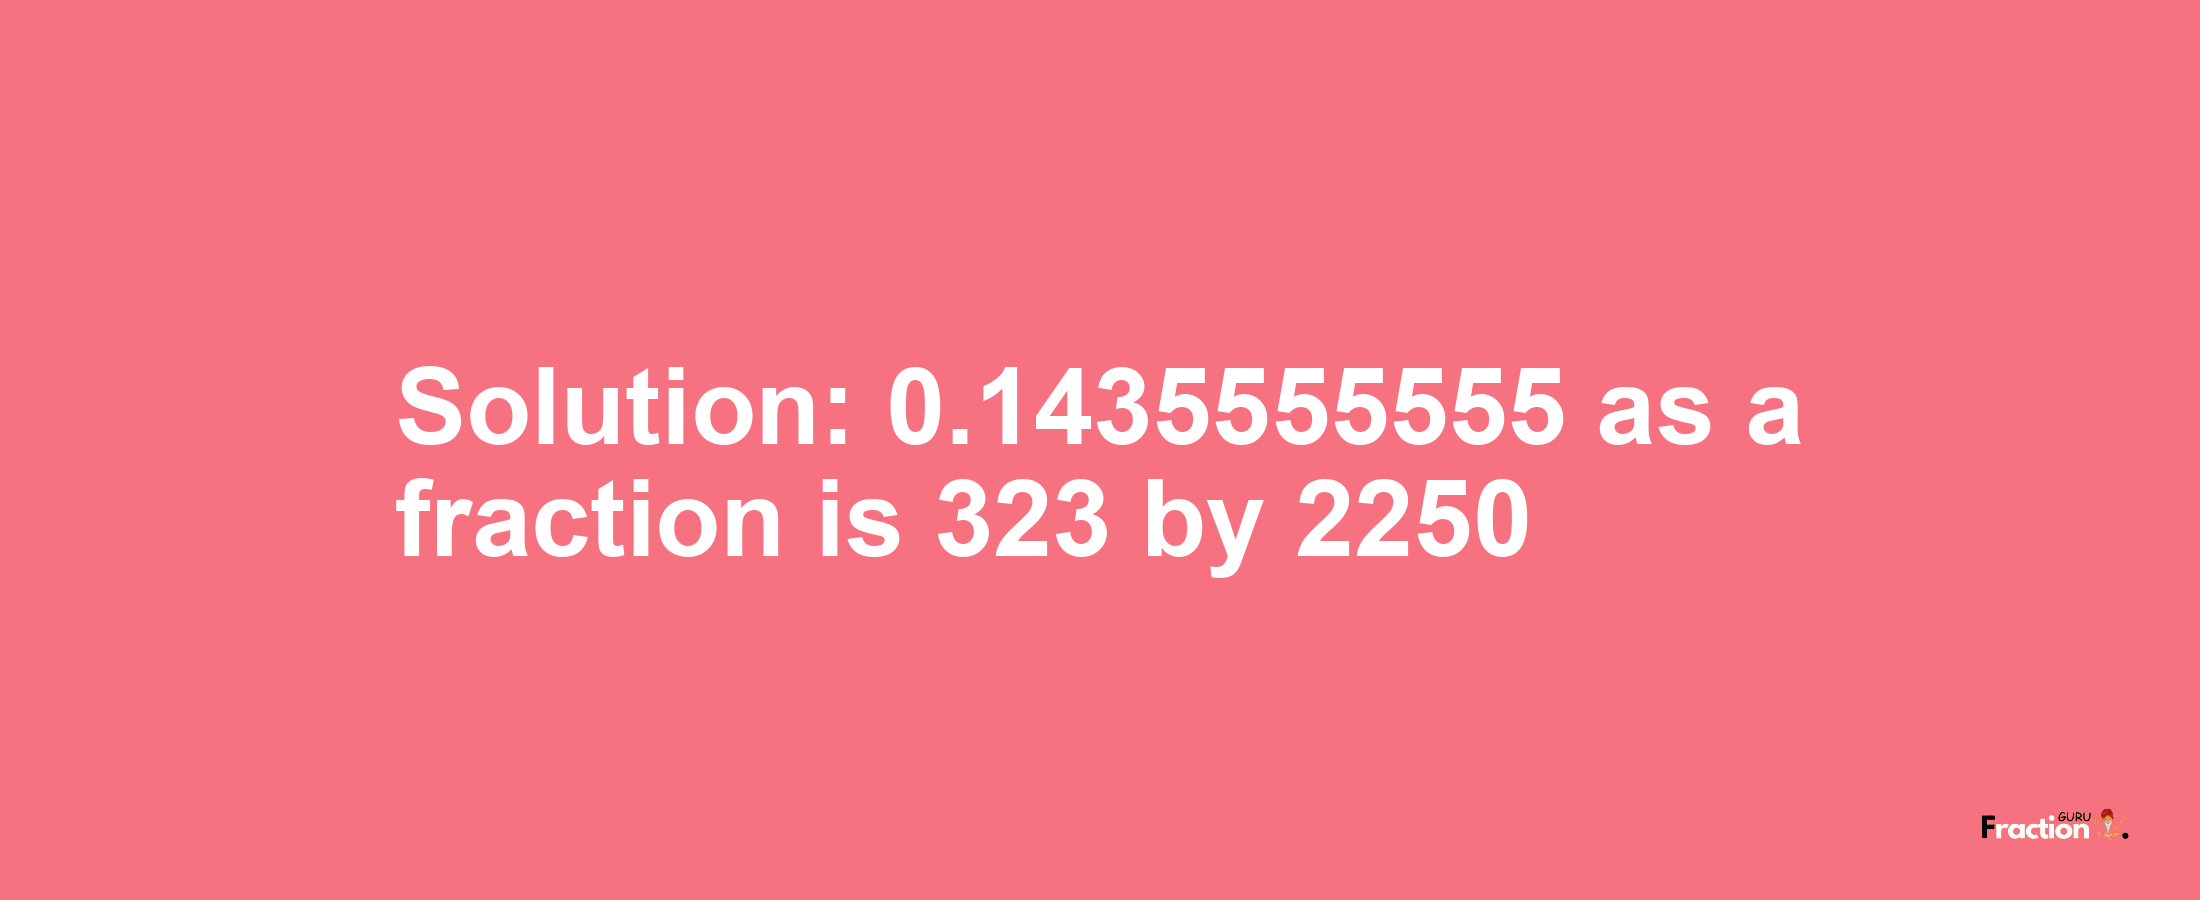 Solution:0.1435555555 as a fraction is 323/2250